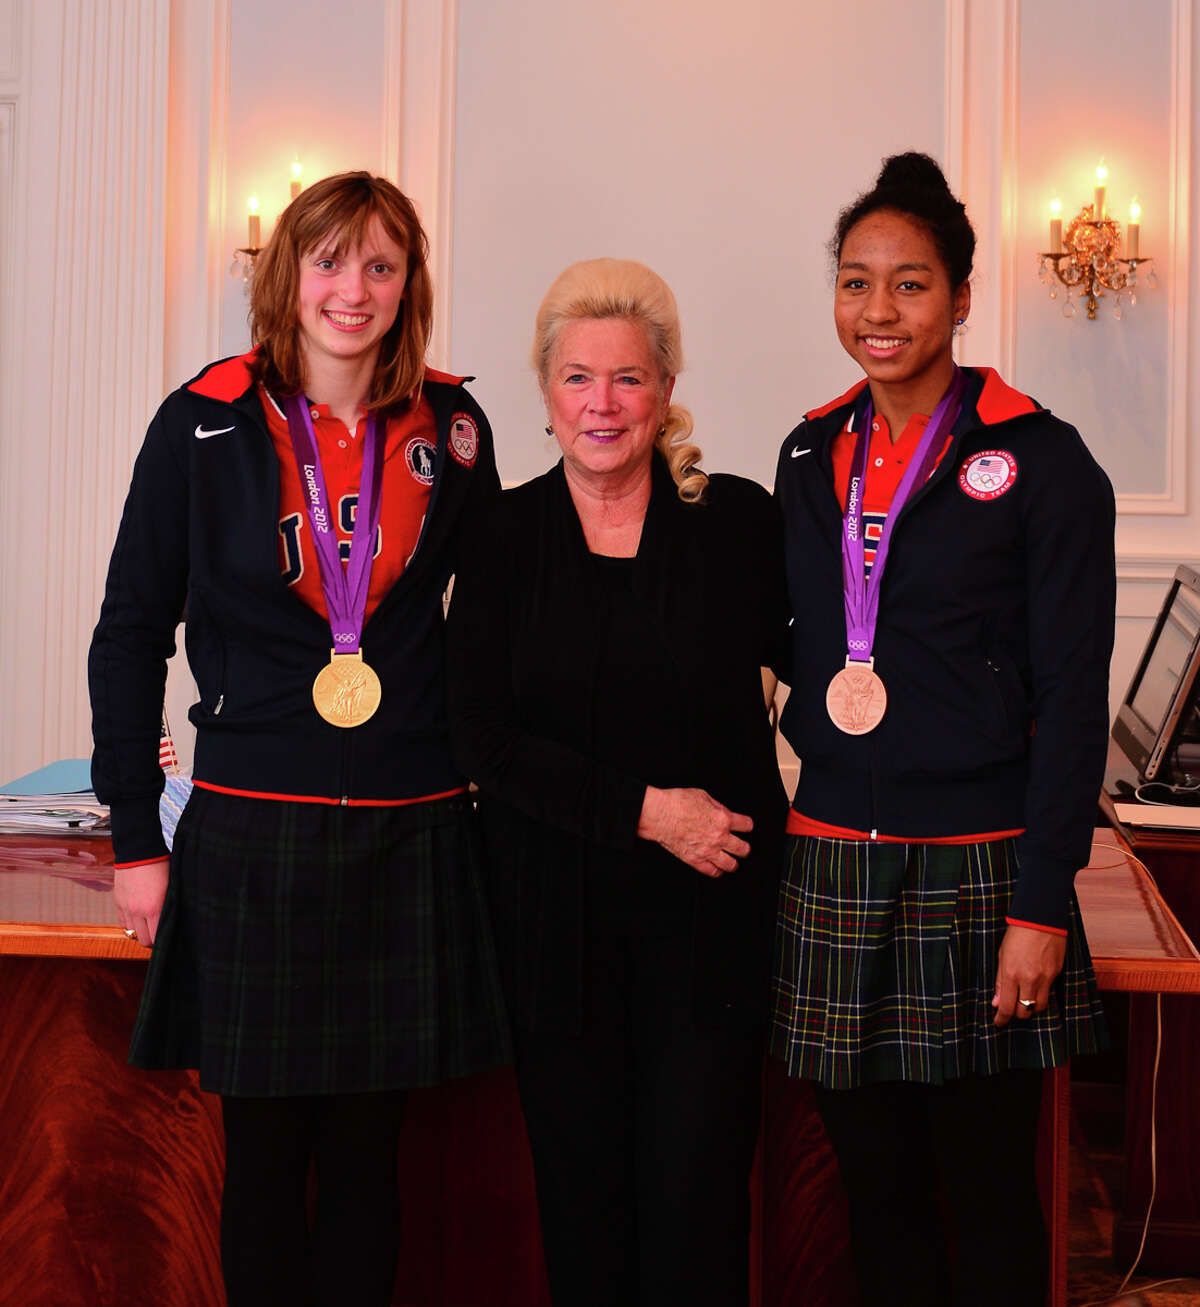 Olympians Katie Ledecky (L) and Lia Neal (R) posed with Head of School Pamela Juan Hayes at Sacred Heart Greenwich in 2013.